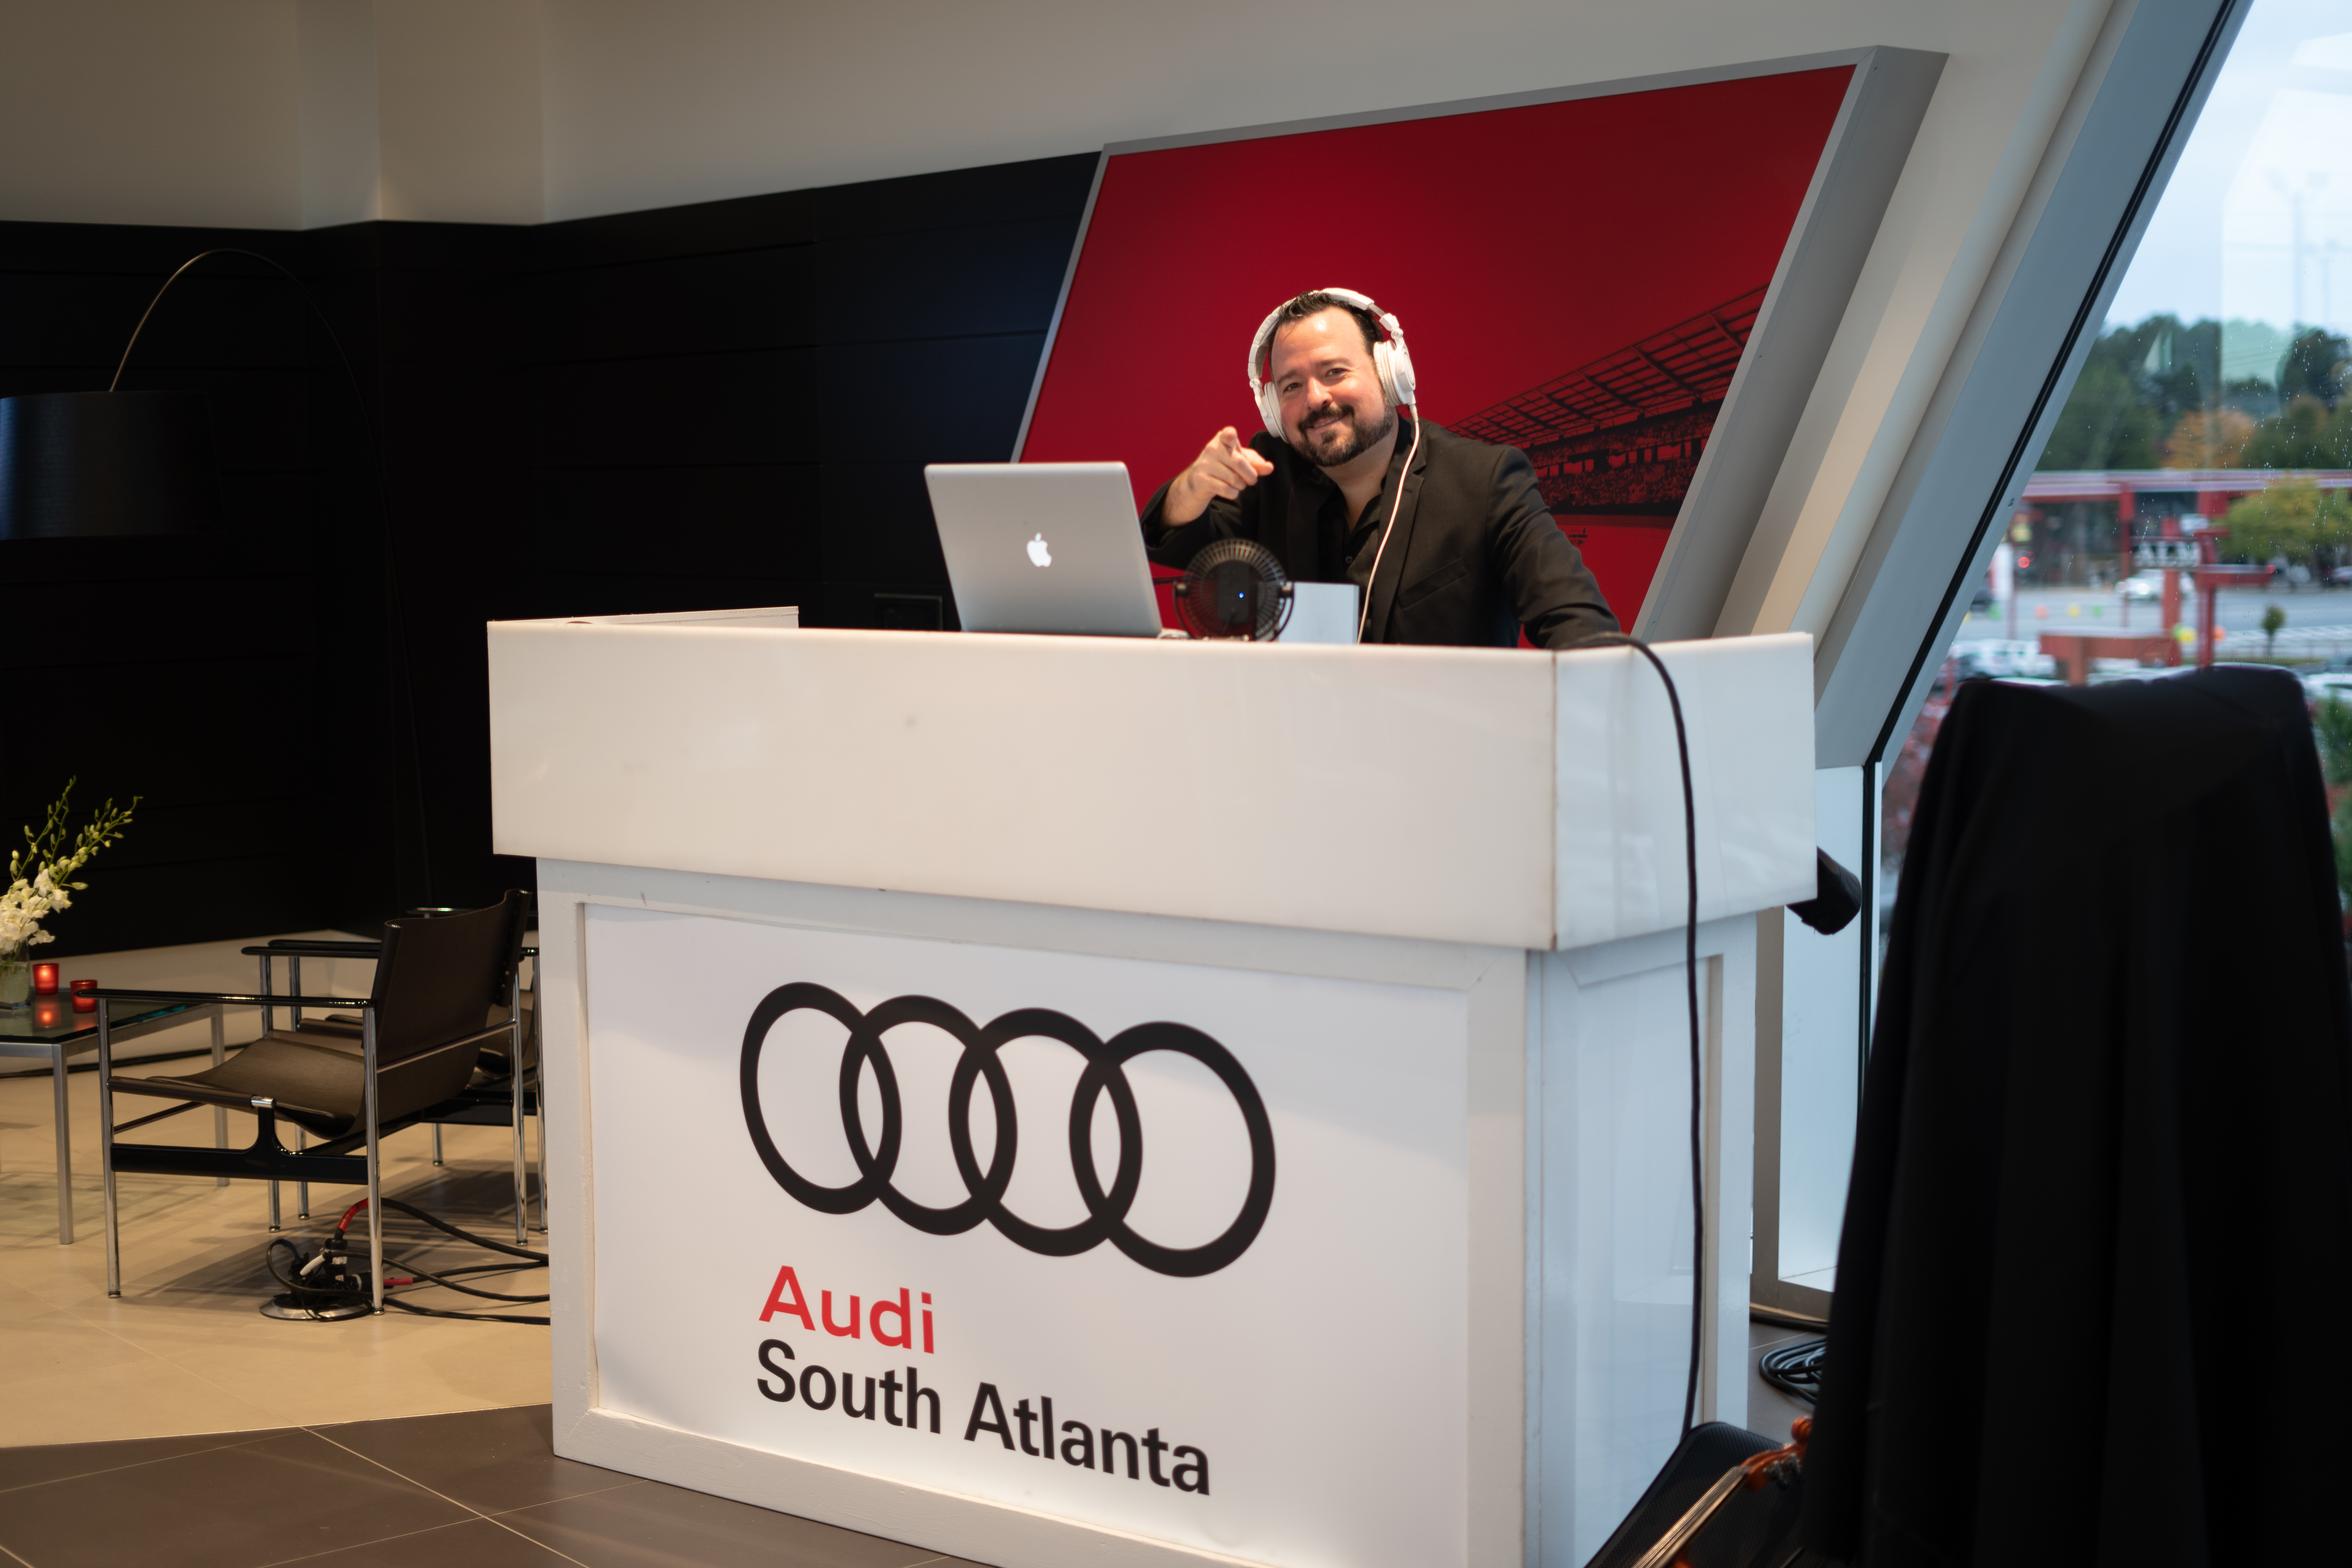 butler auto group of south atlanta, audi, audi dealership, atlanta dealership, grand opening, atlanta grand opening, wm event,s event planning, event planner, event design, event designer, event consultant, event consulting, event management, affairs to remember, social events, corporate events